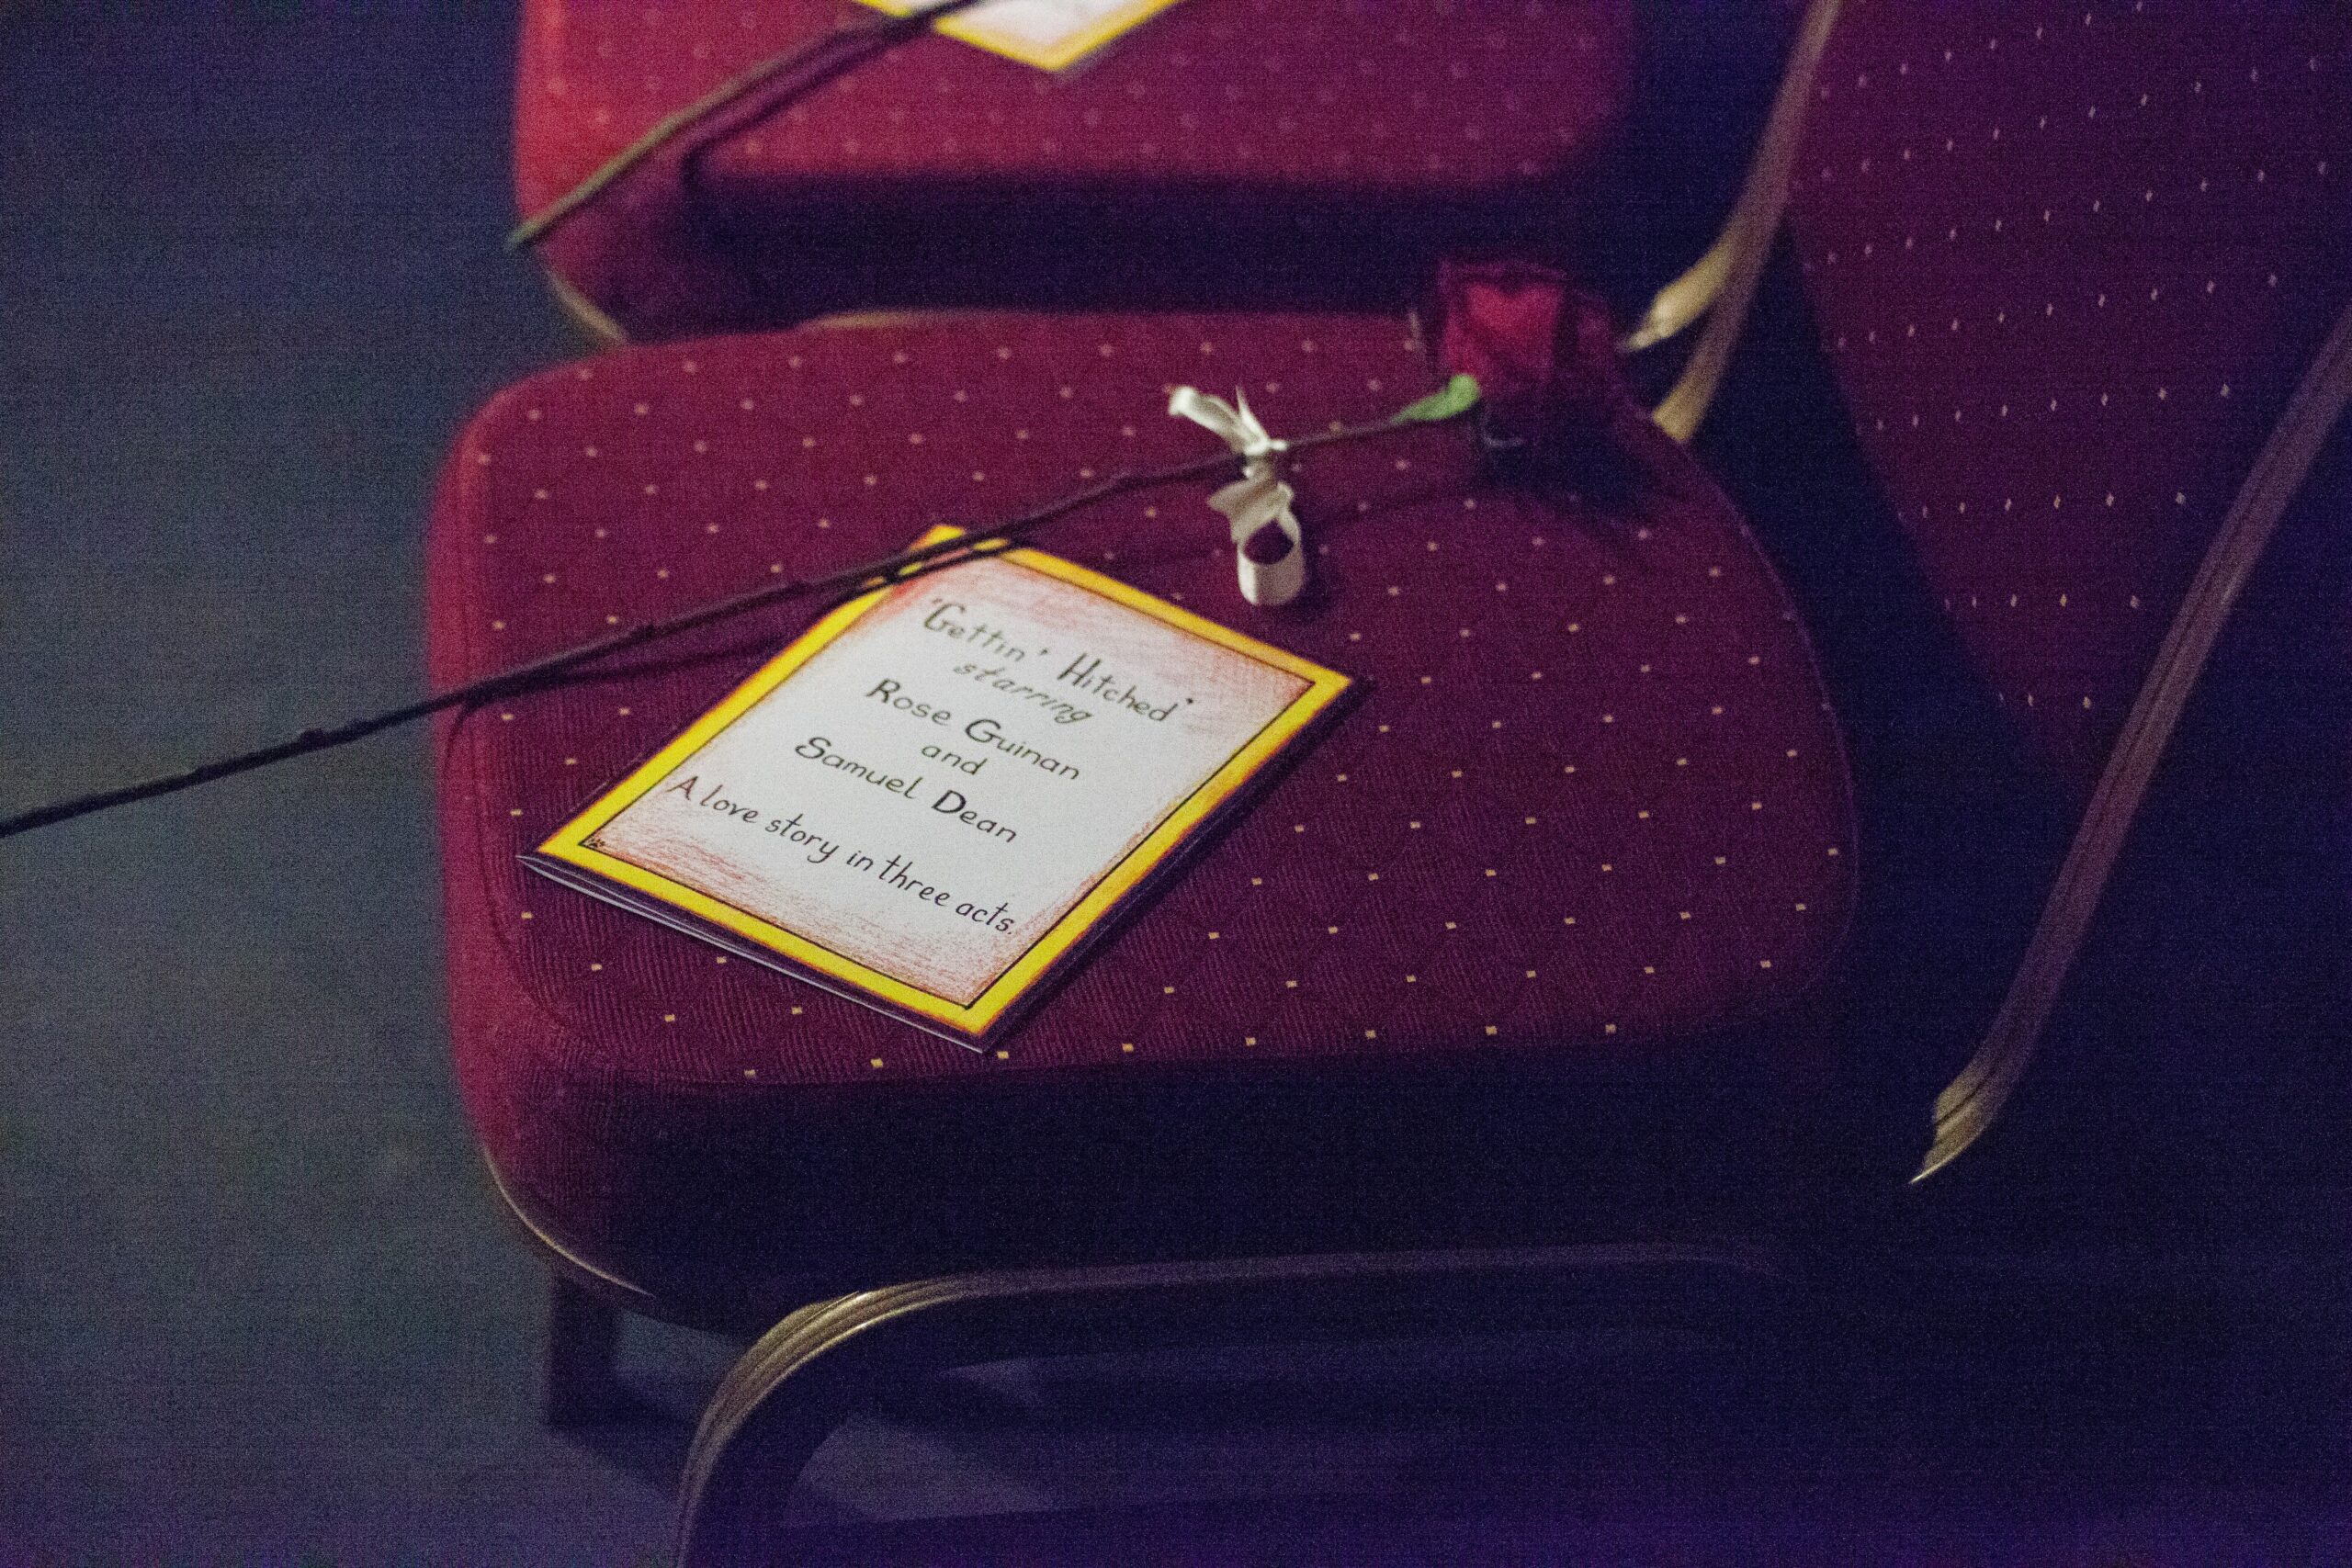 Bridebook.co.uk order of service and rose on theatre chair